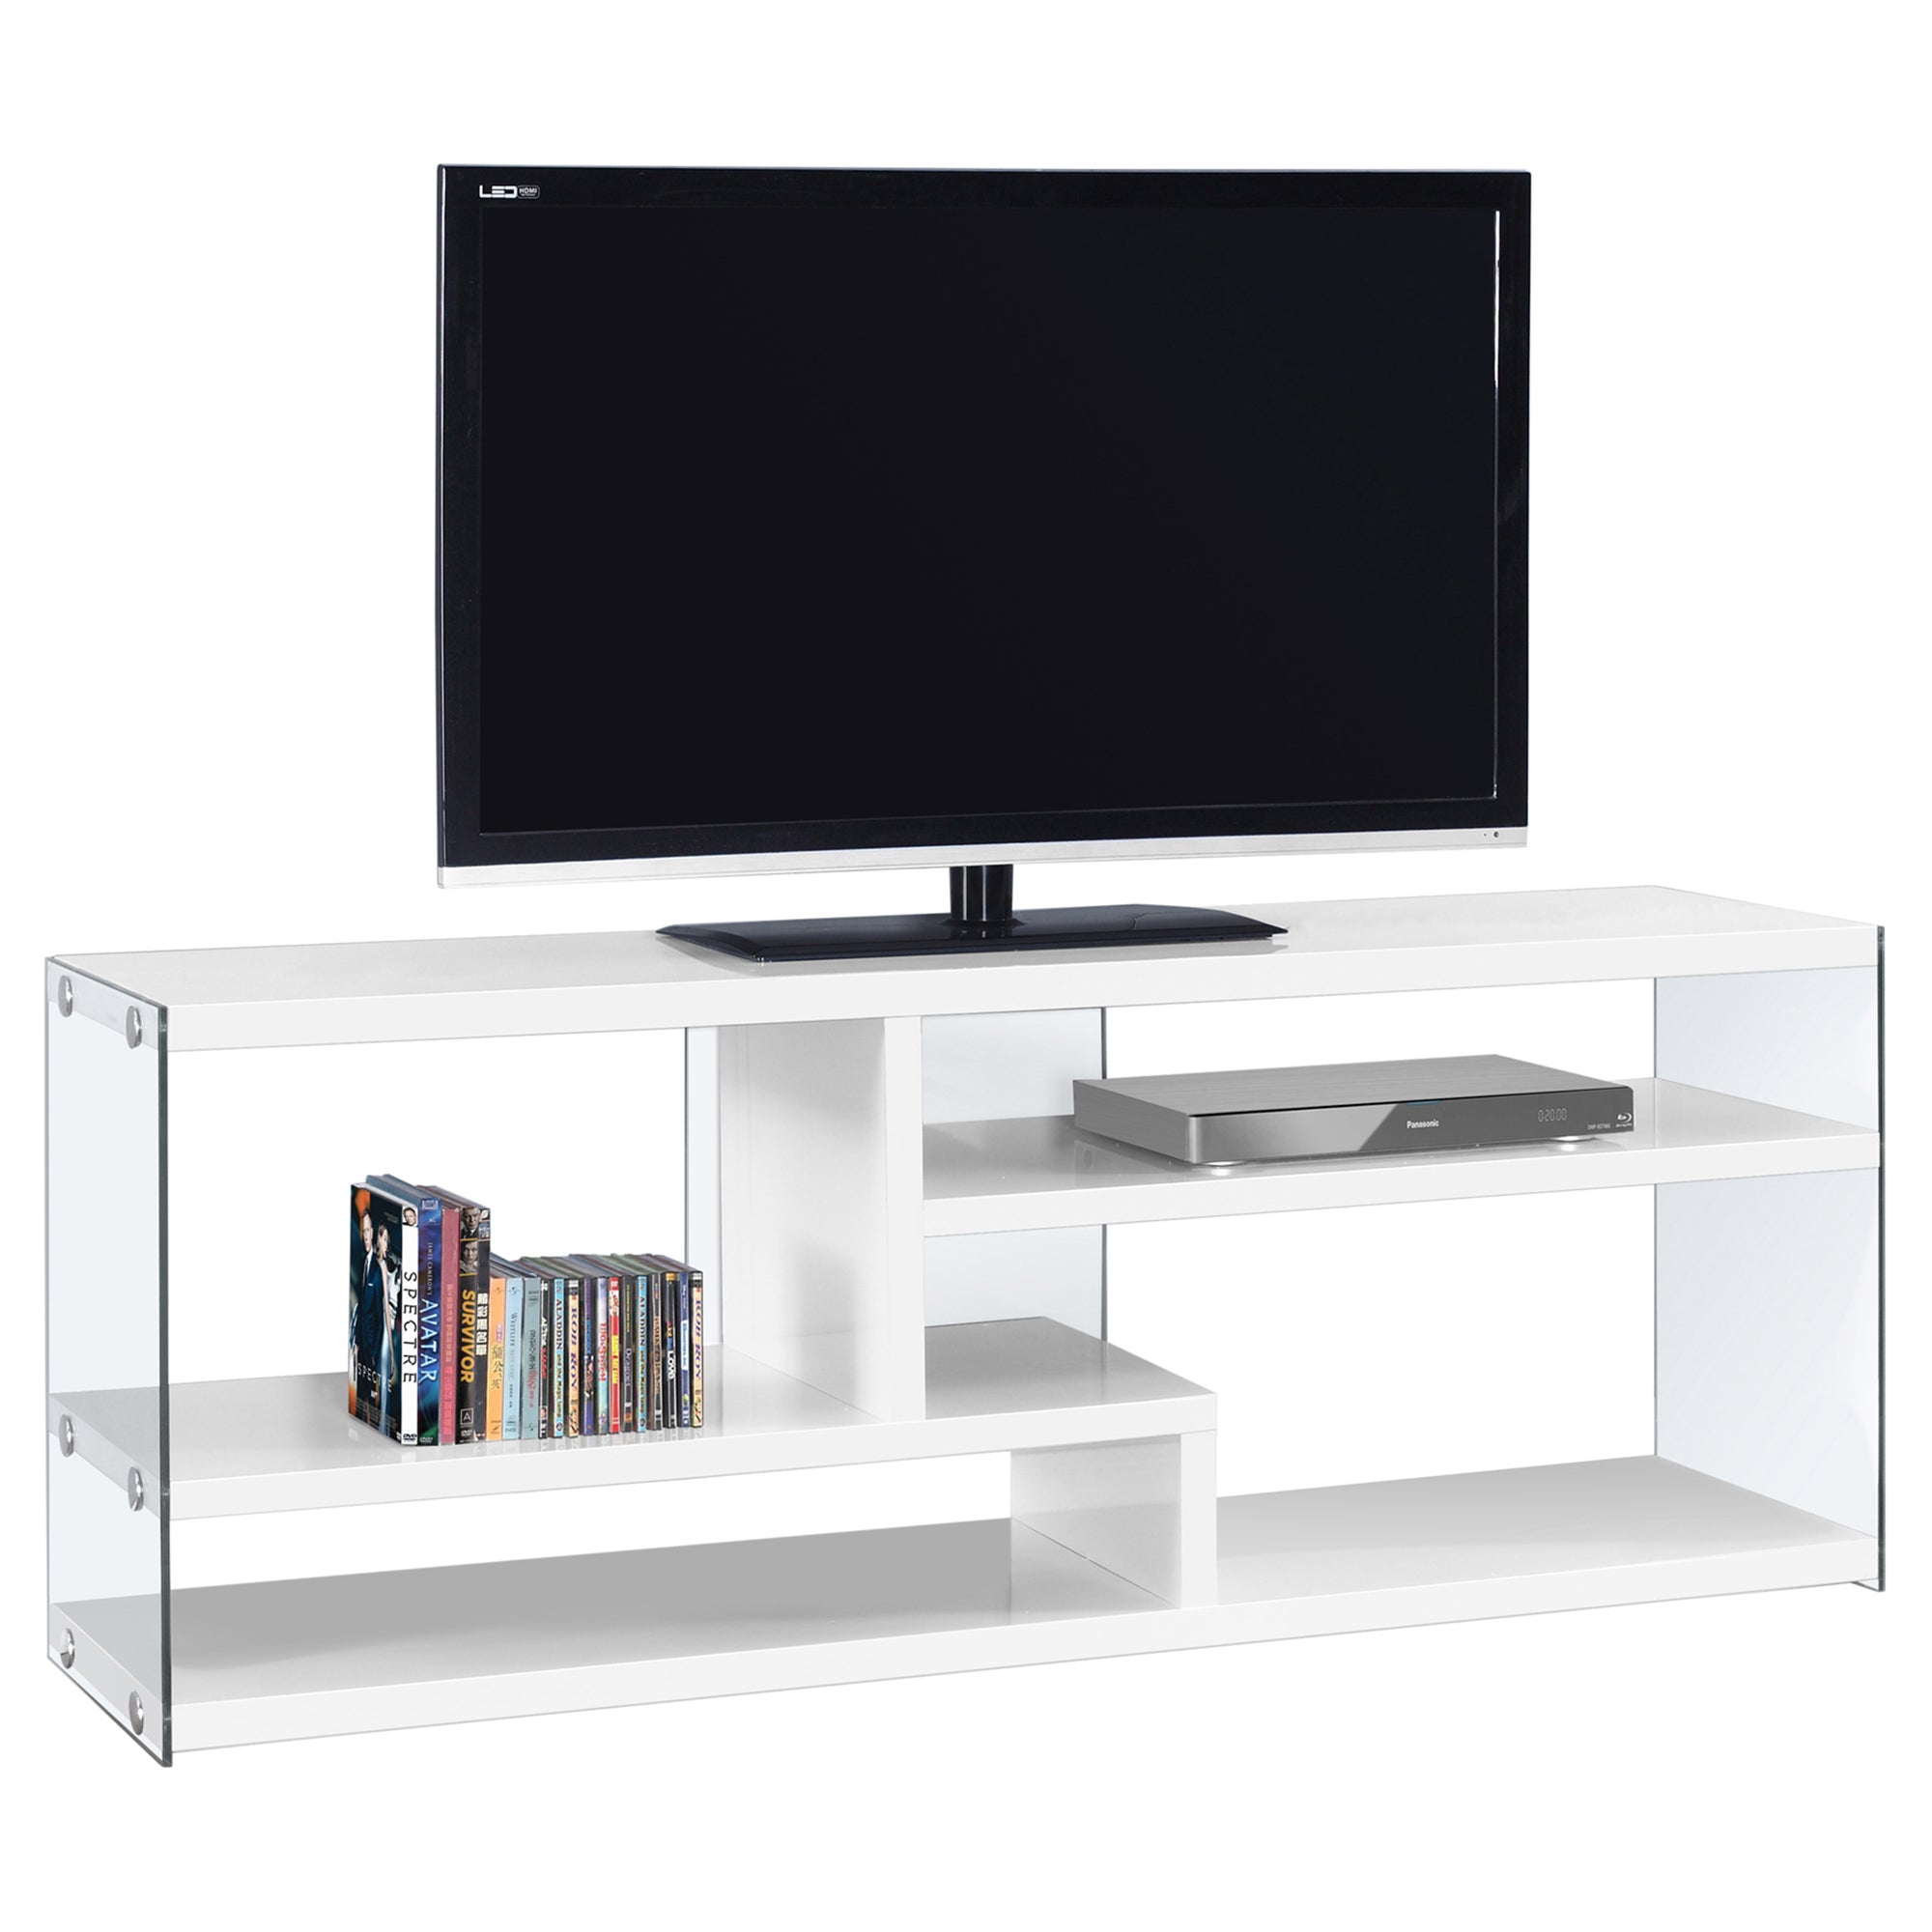 Glossy White 60" TV Stand with Shelves and Tempered Glass